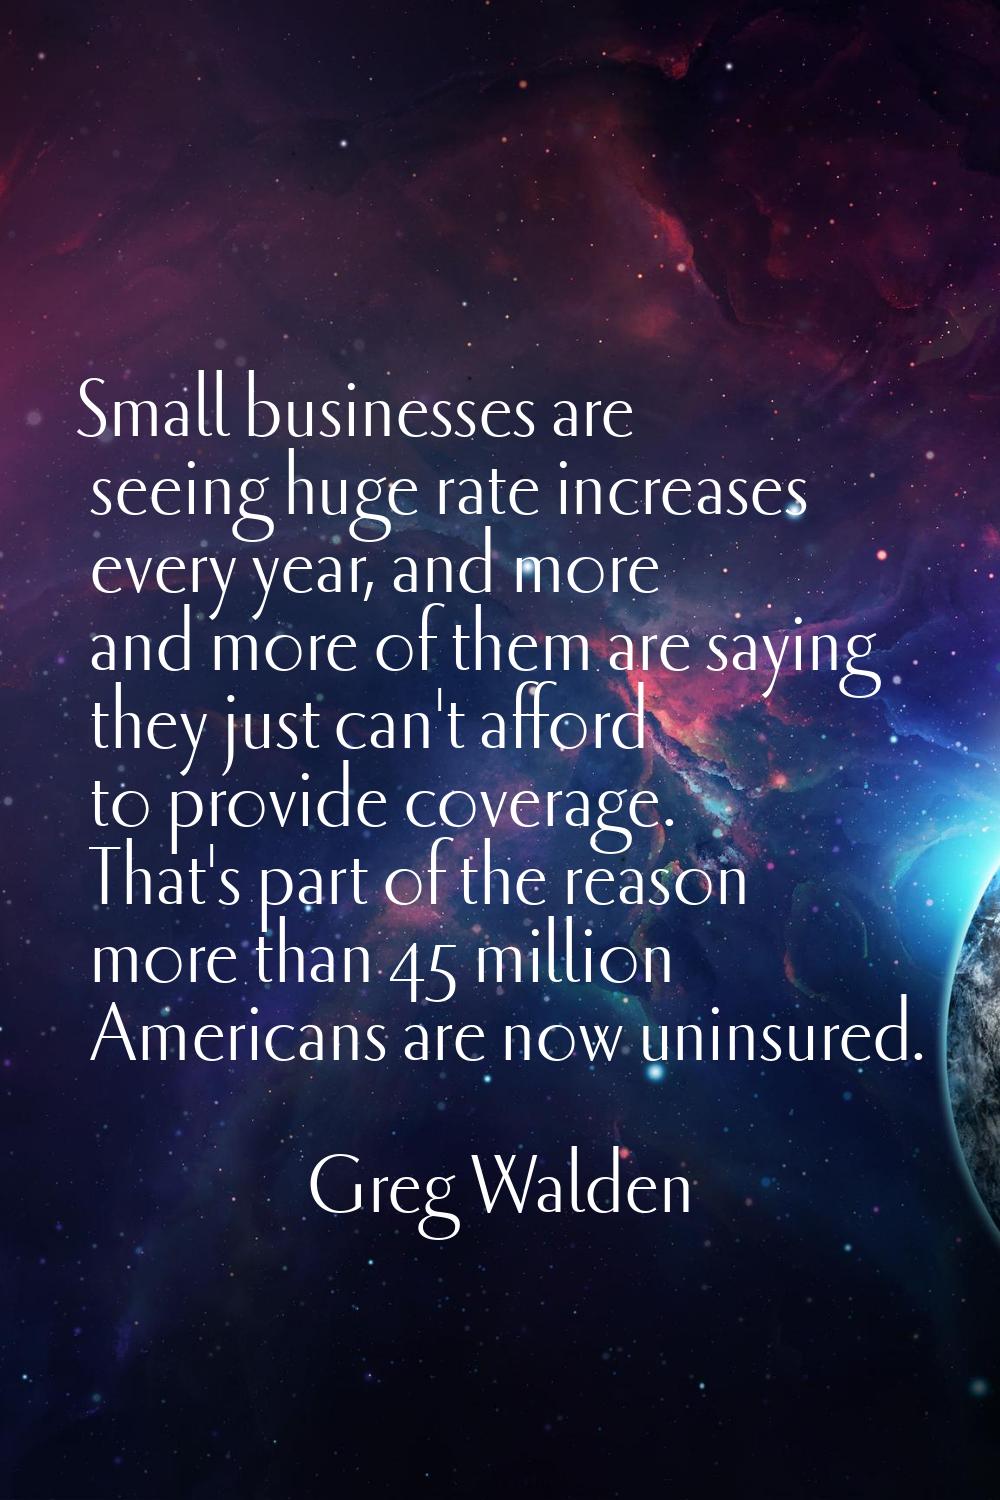 Small businesses are seeing huge rate increases every year, and more and more of them are saying th